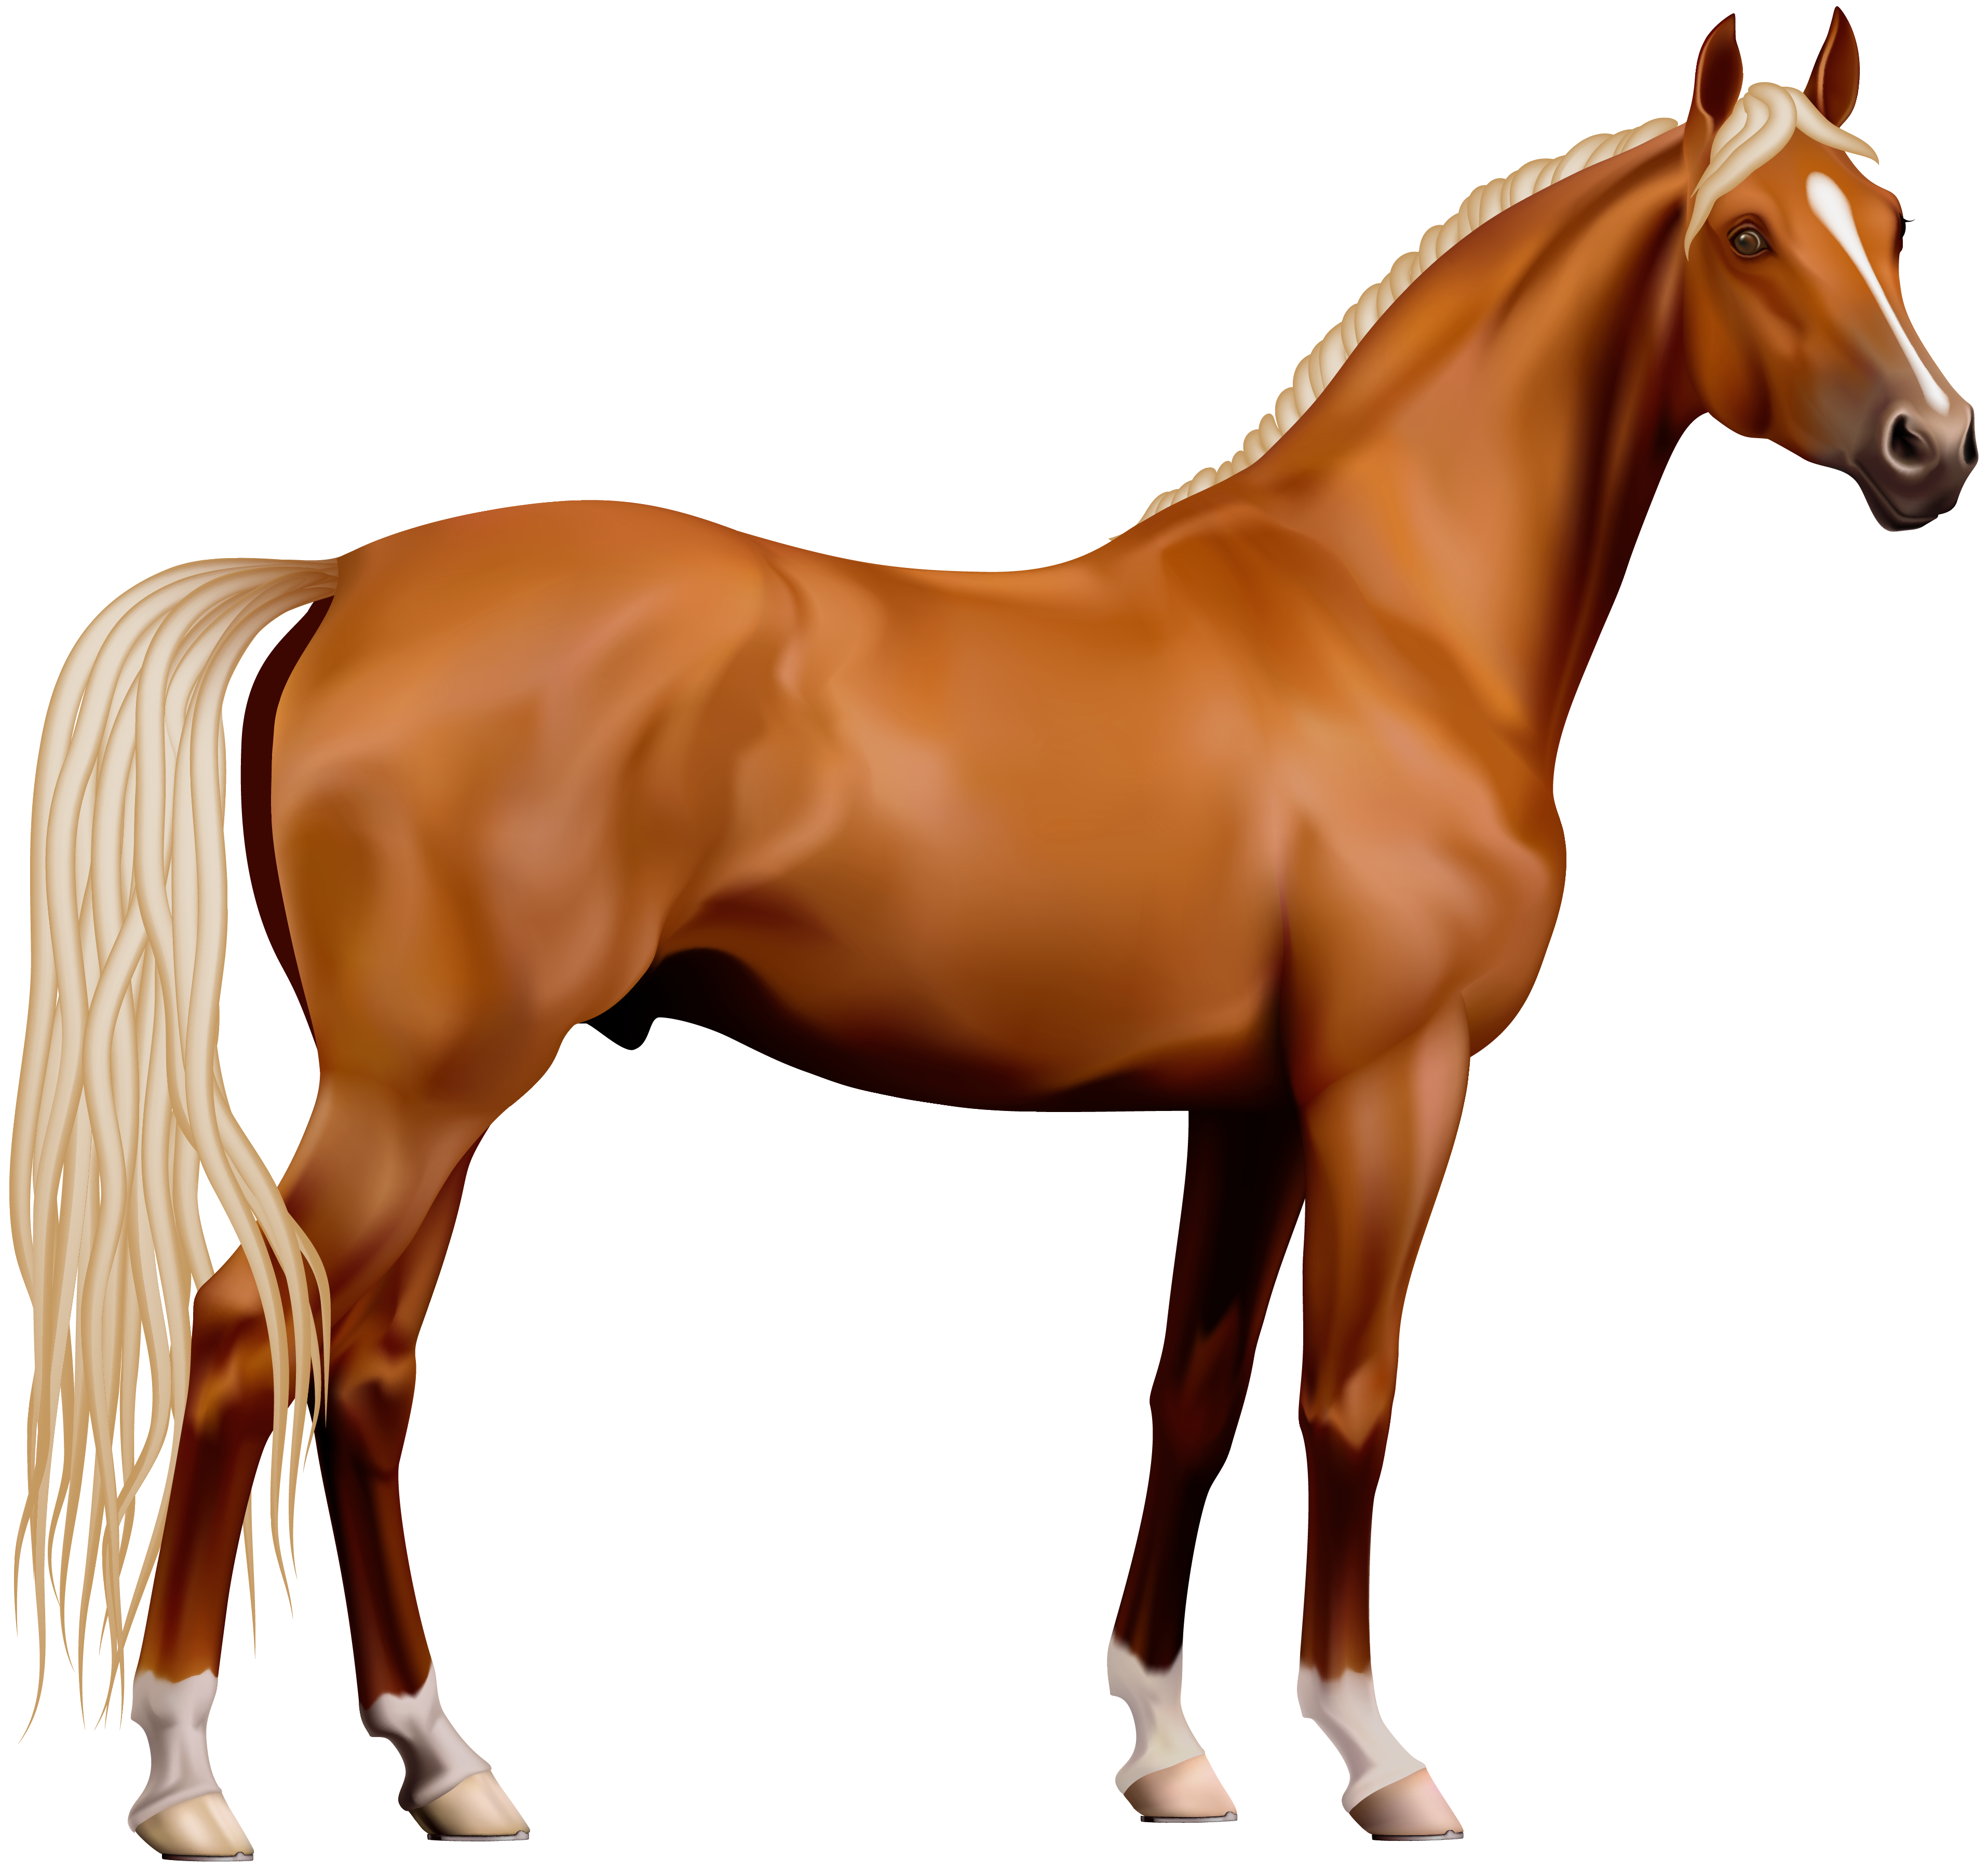 Transparent Horse PNG Clipart​ | Gallery Yopriceville - High-Quality Free  Images and Transparent PNG Clipart